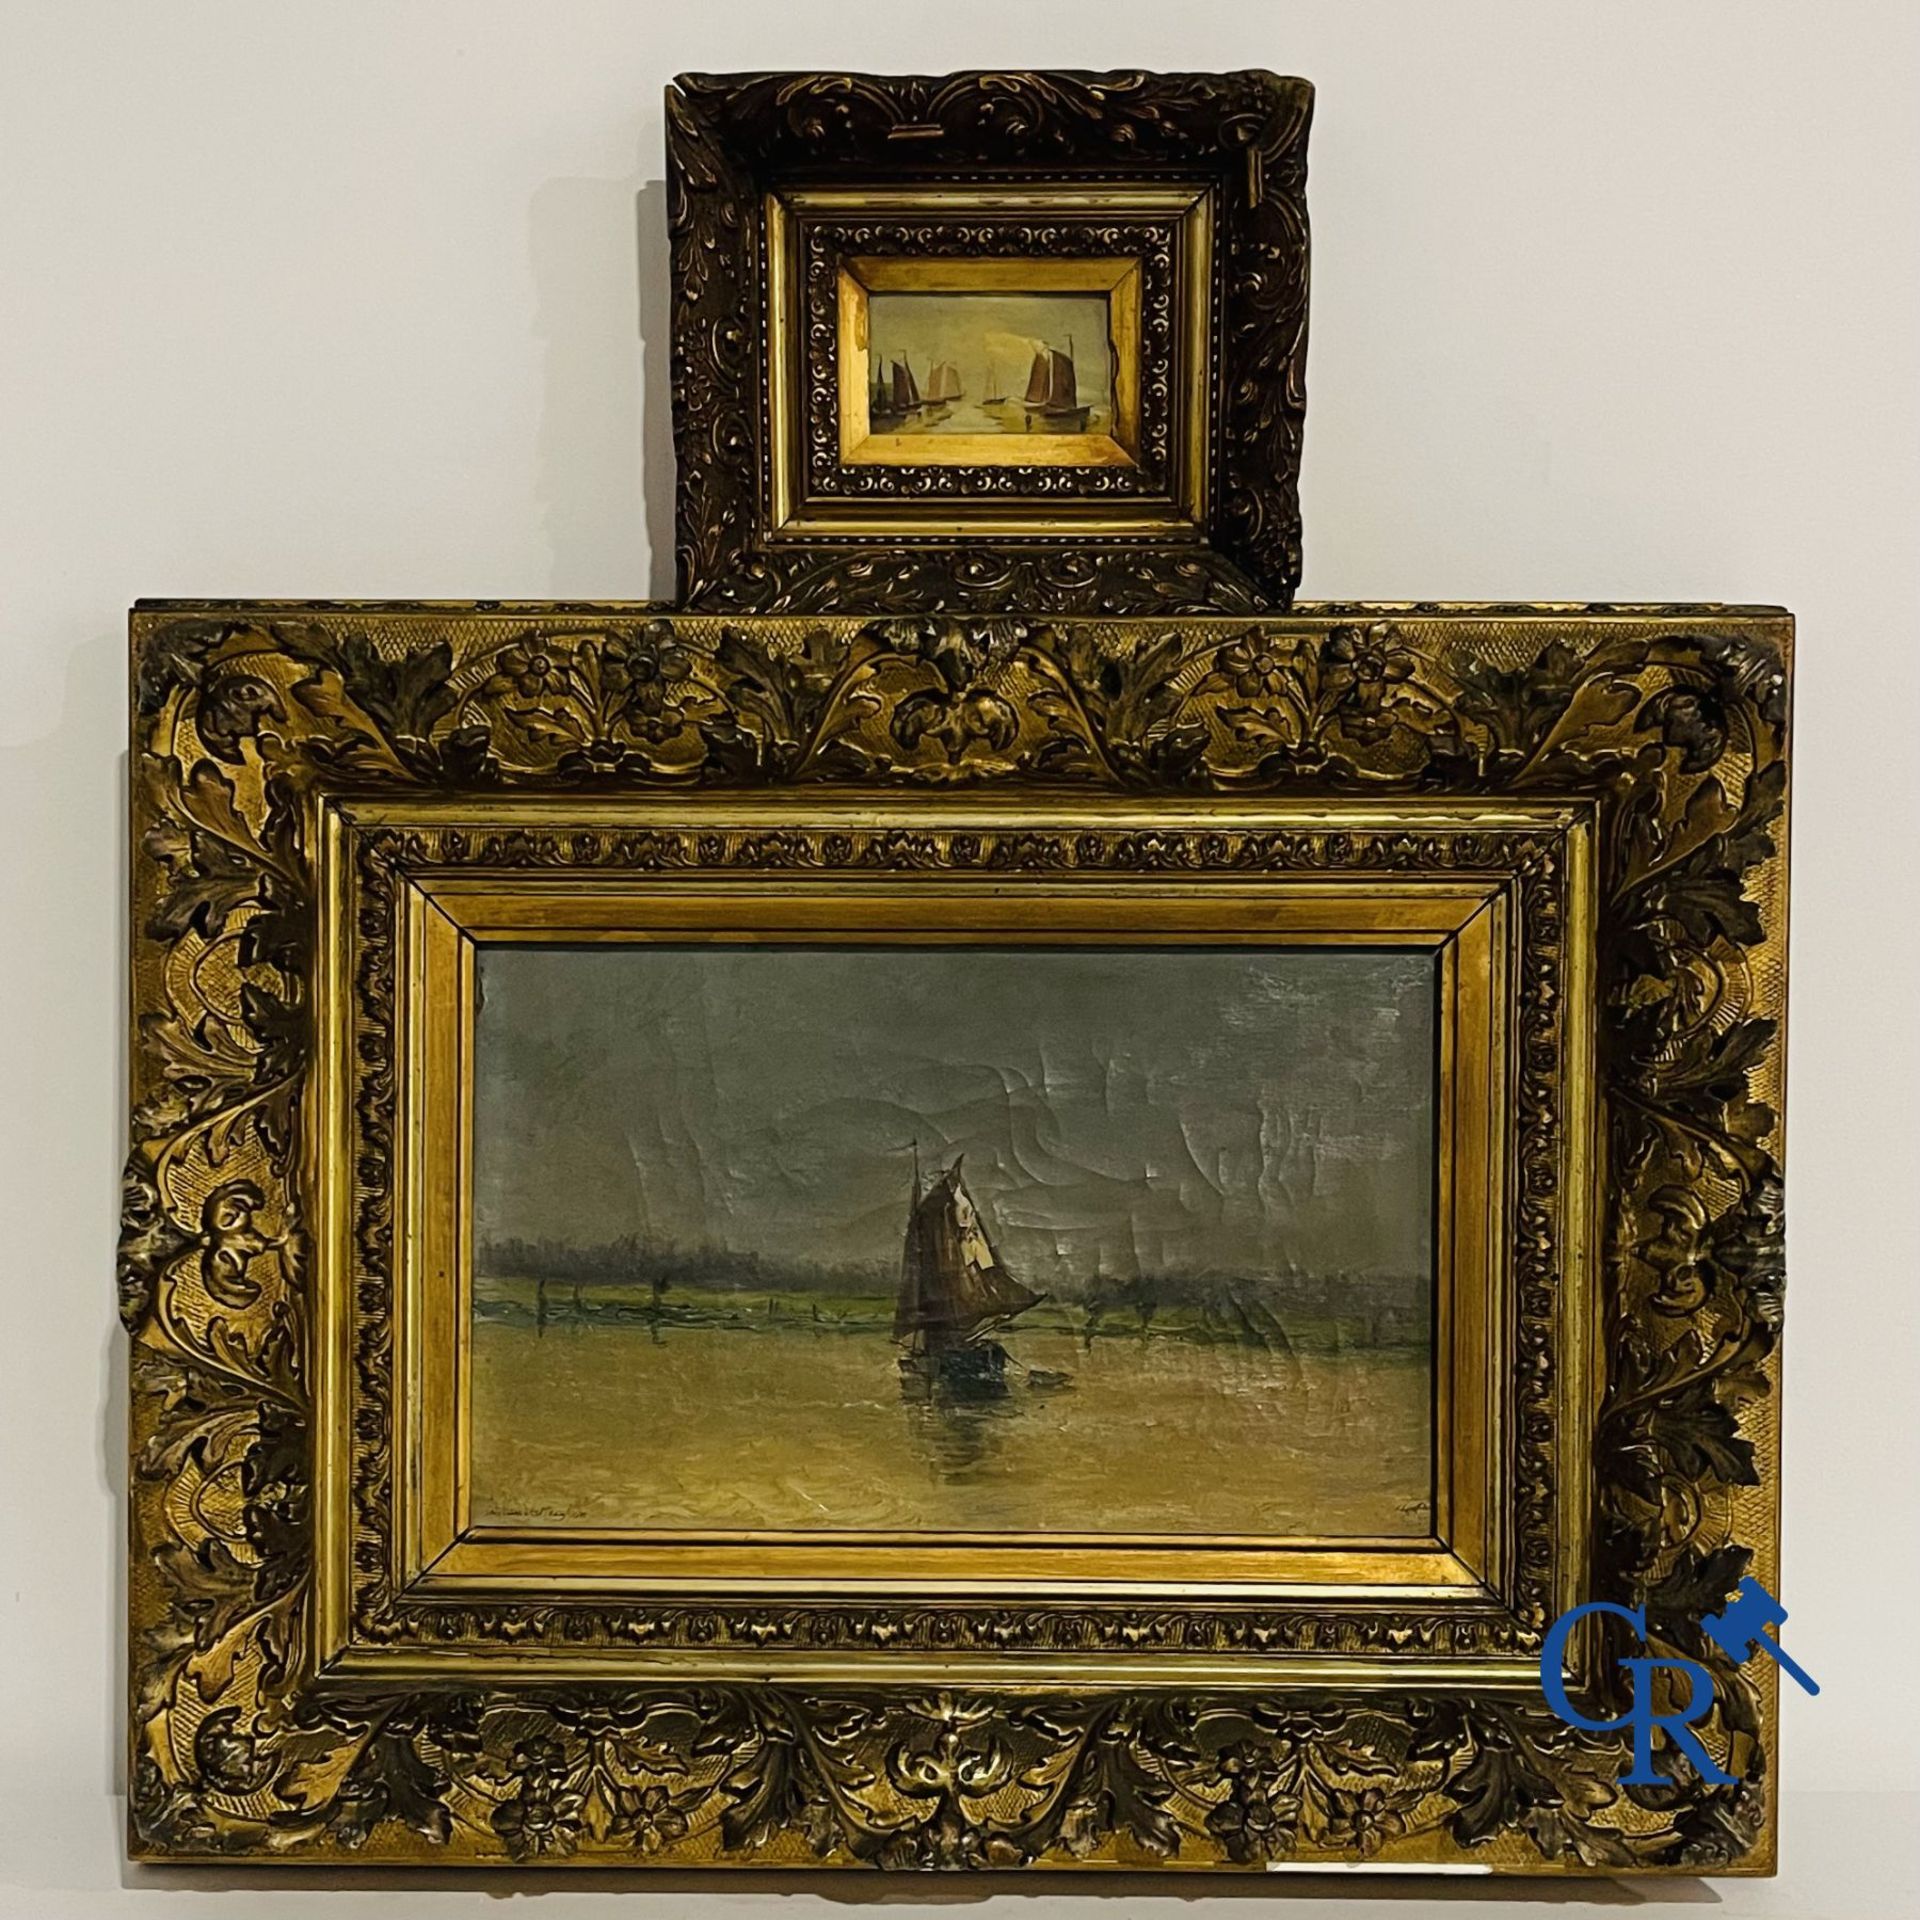 2 Paintings: Edouard Vanderhaeghen. Sailboat in the polders and a sea view. Signed illegibly.